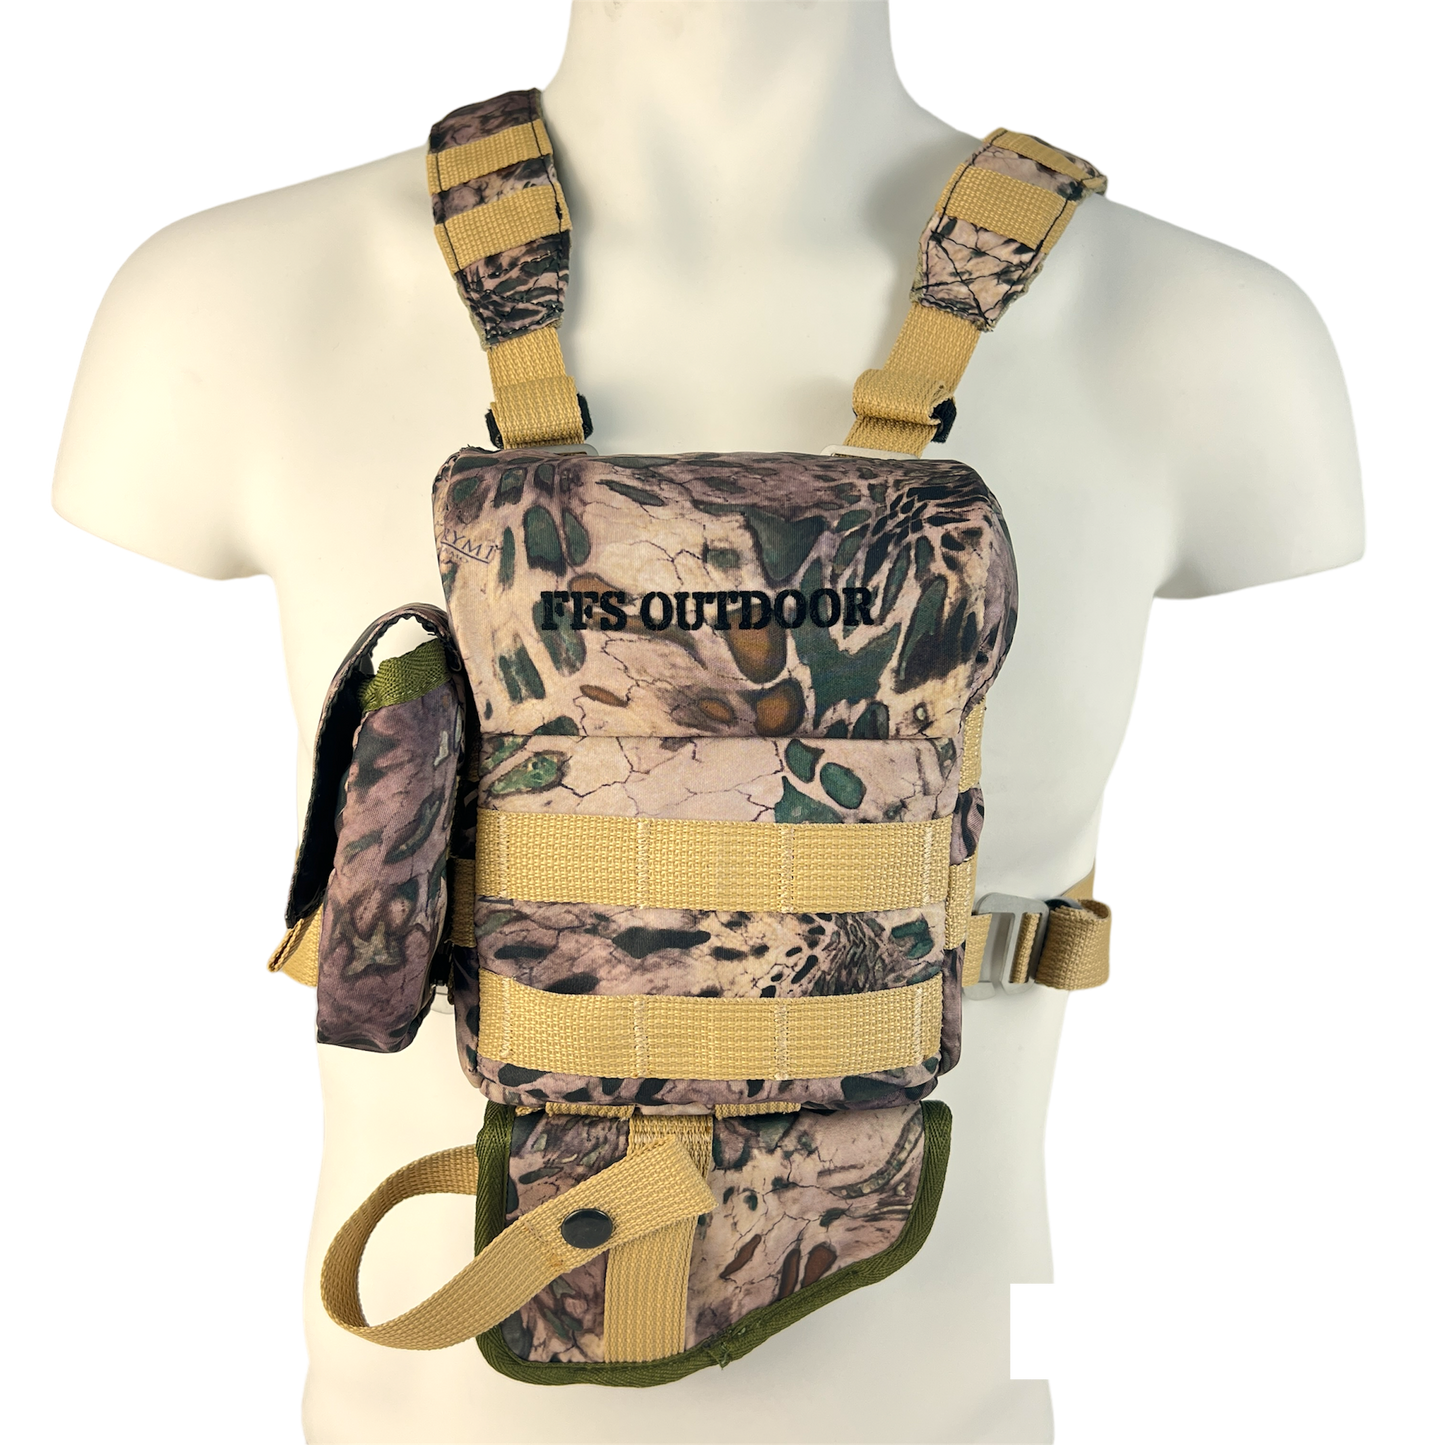 Impi Binocular chest pack and harness